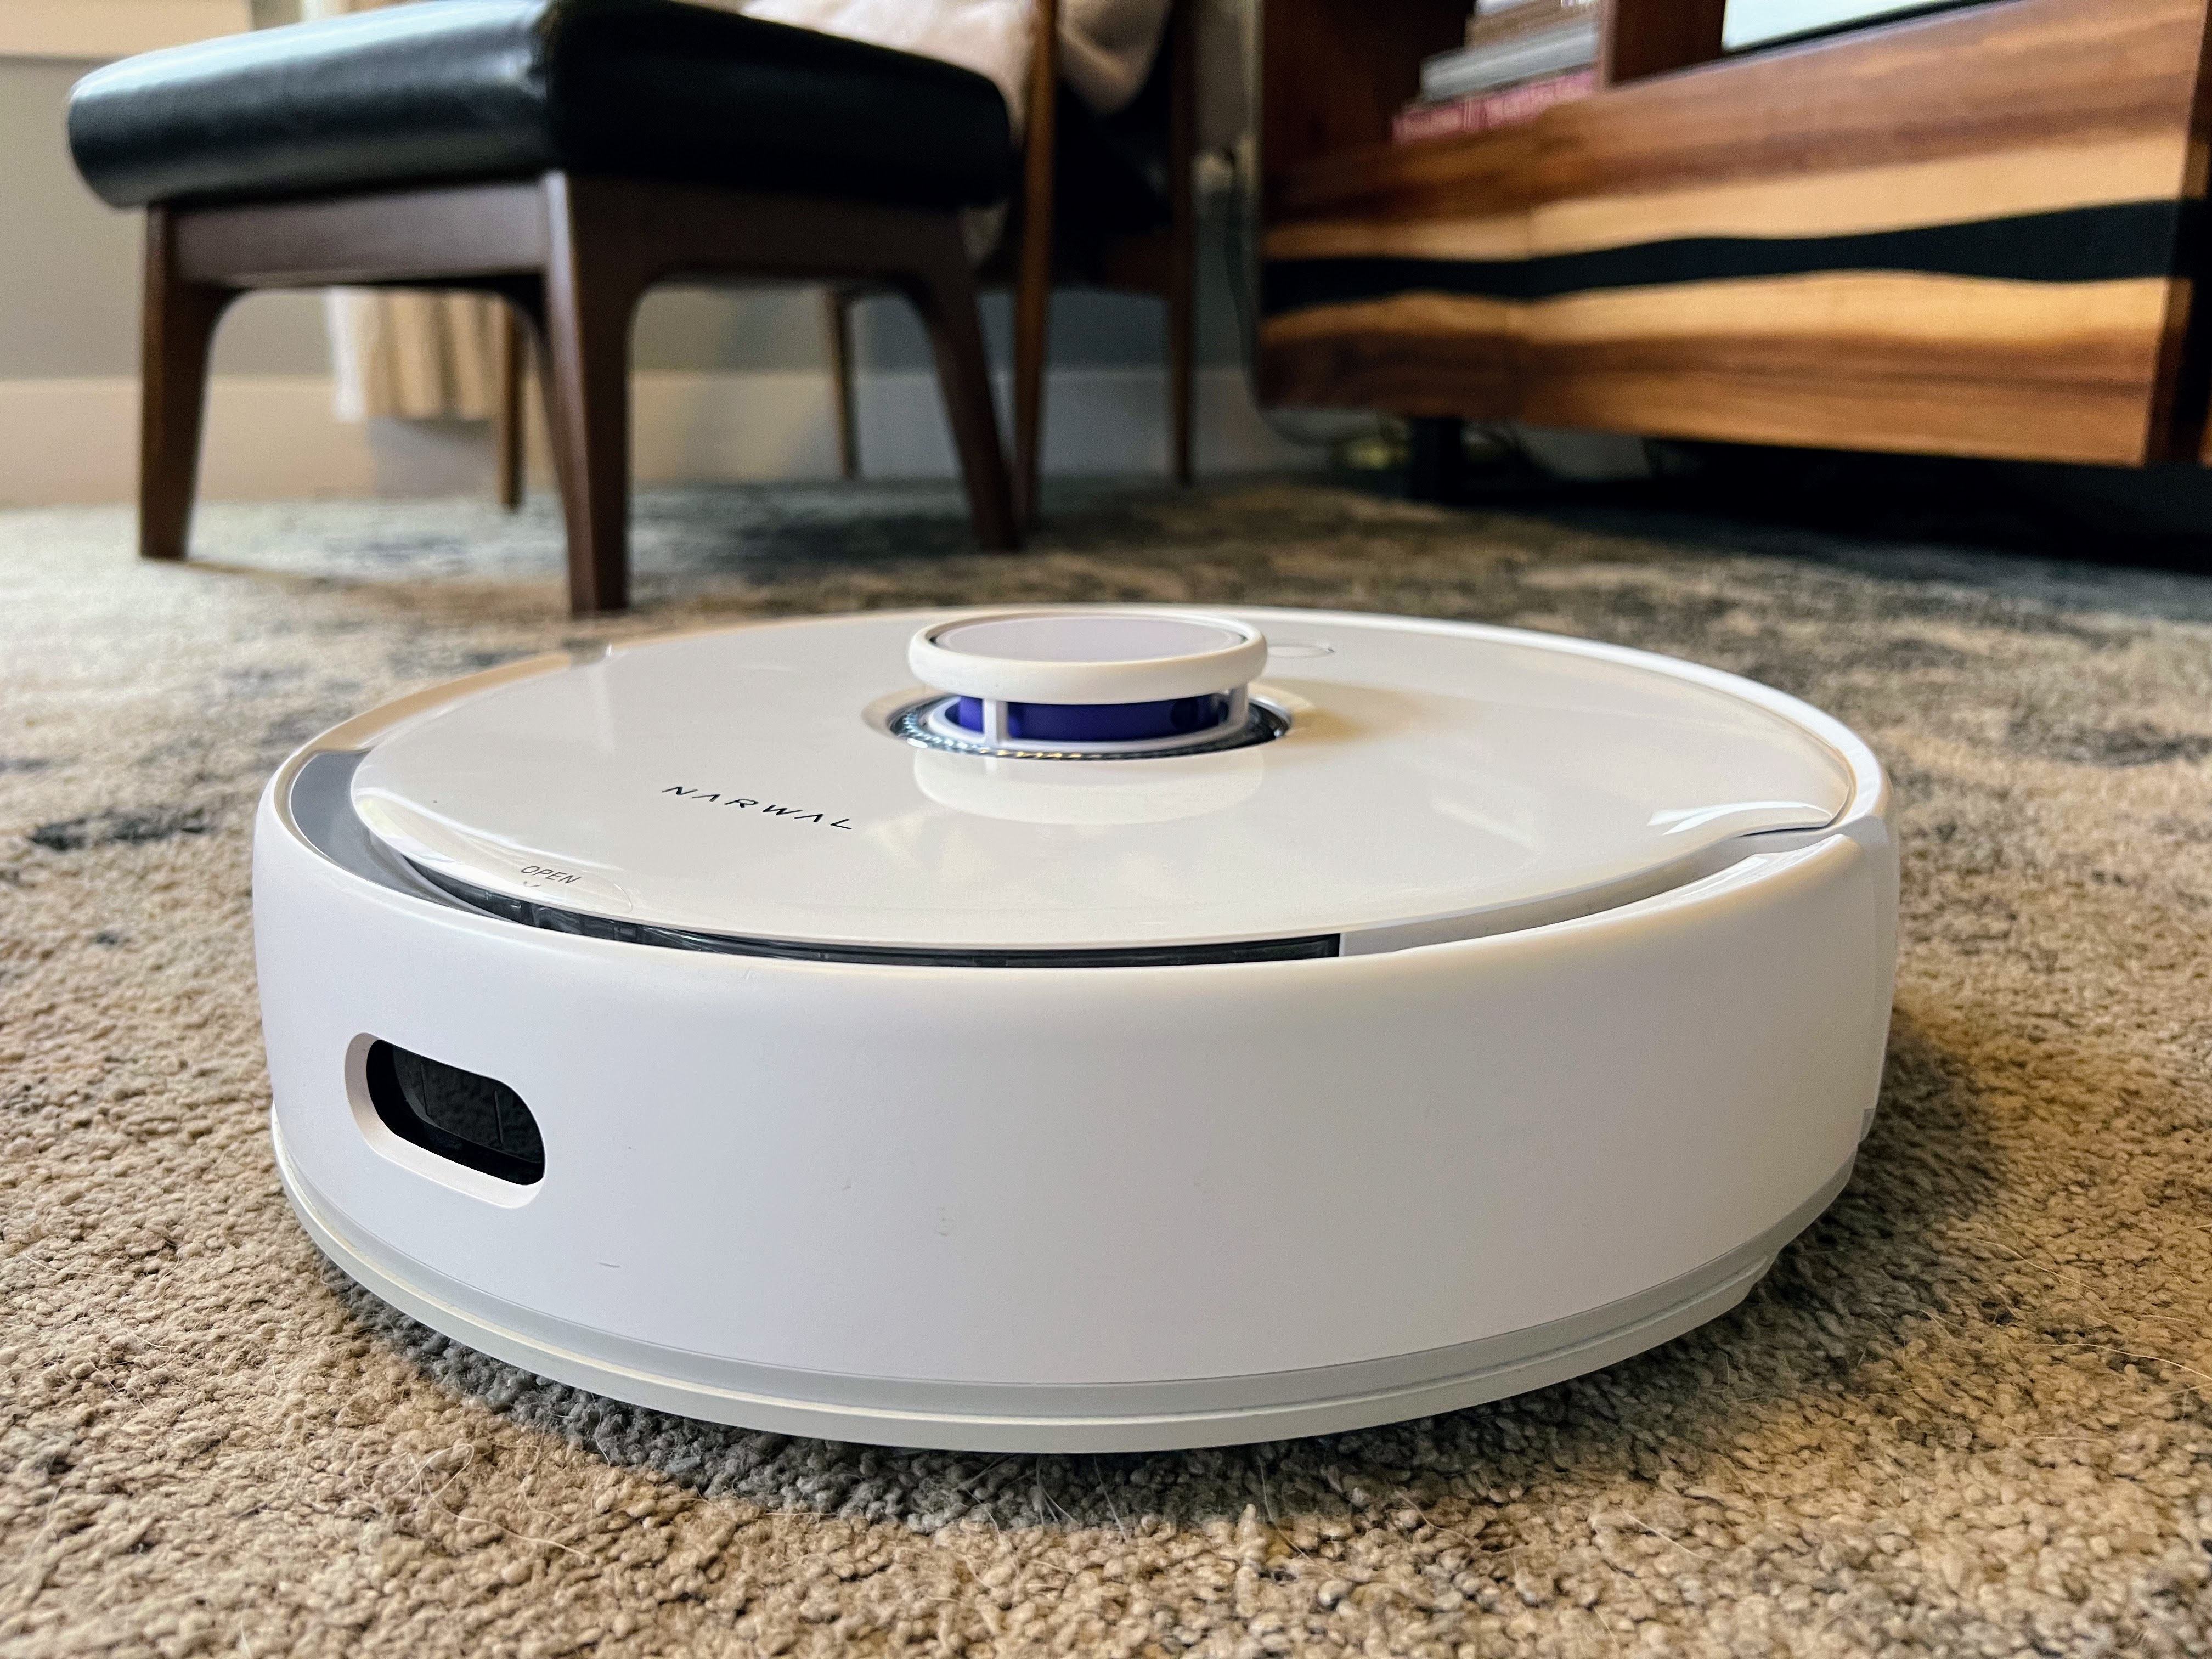 Narwal Freo robot vac/mop review - keep your floors shiny in style! - The  Gadgeteer